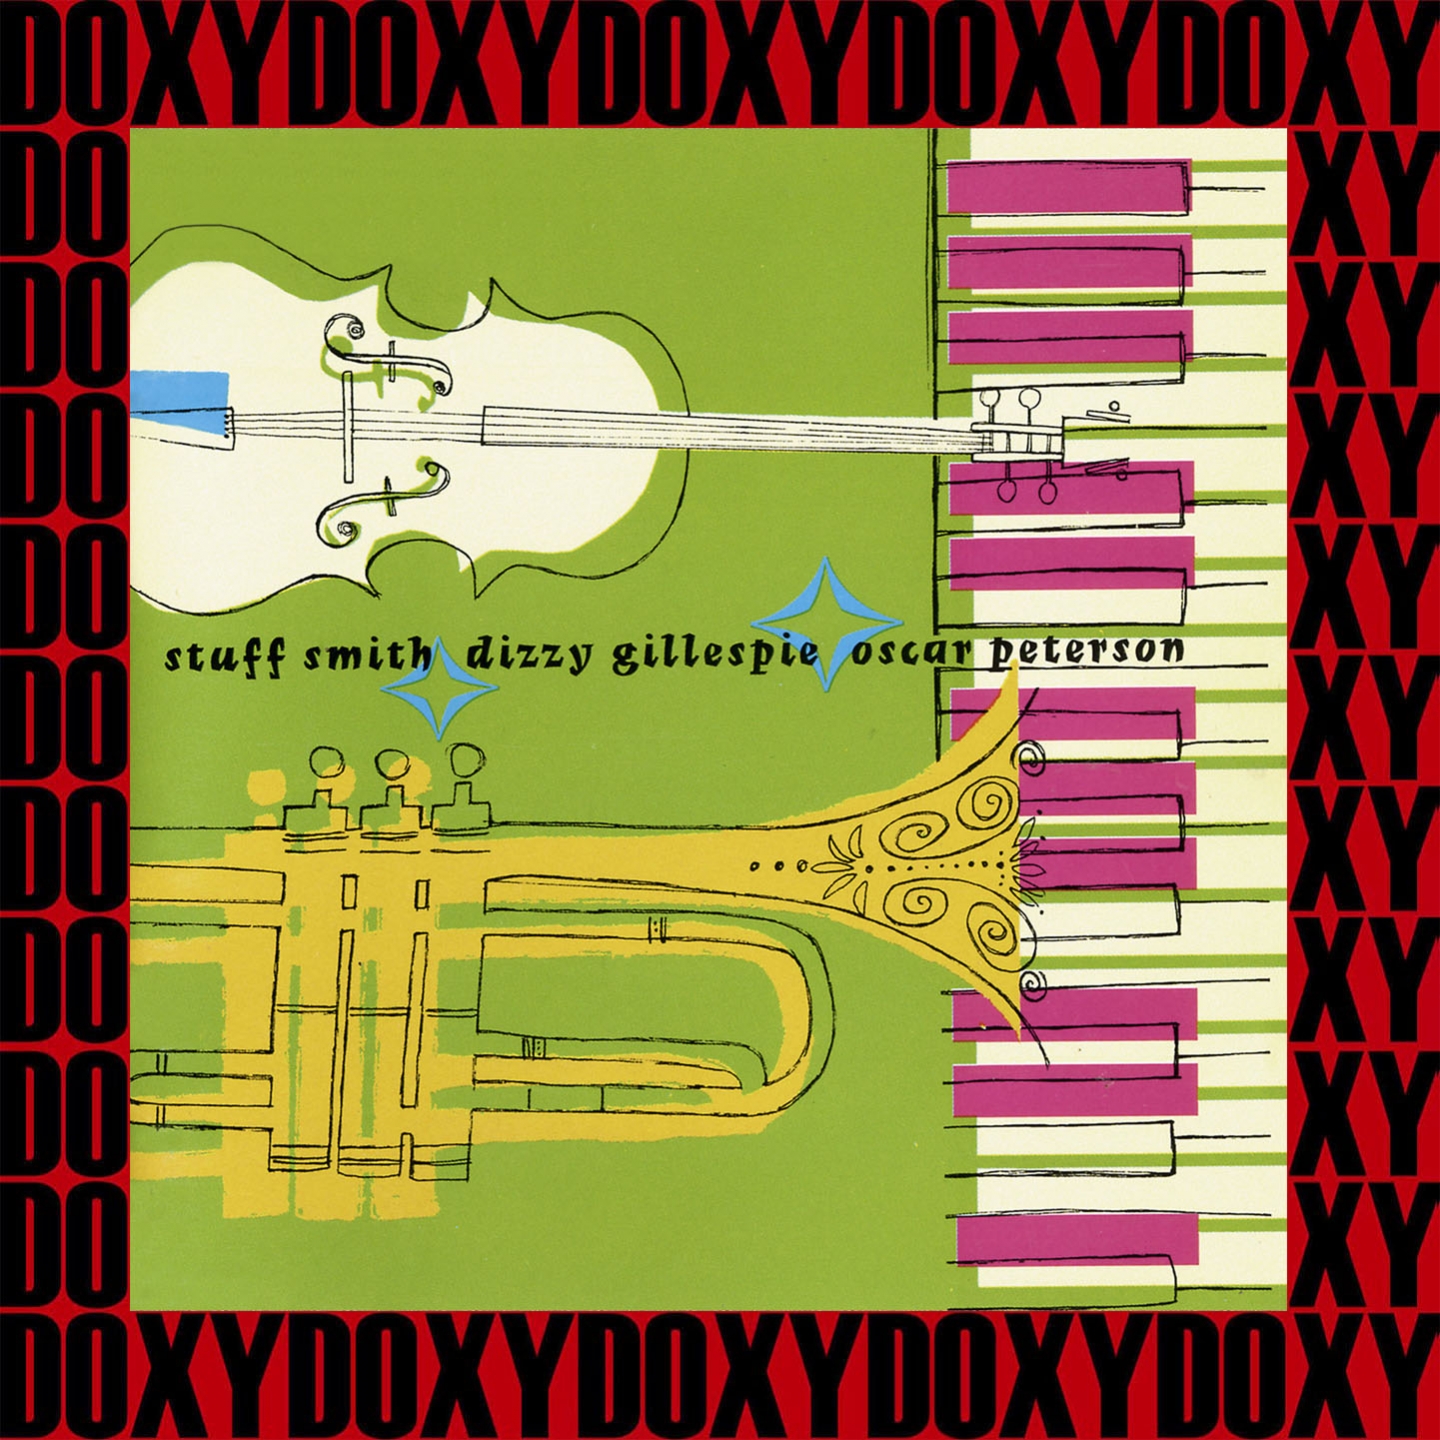 Stuff Smith, Dizzy Gillespie, Oscar Peterson (Remastered Version) (Doxy Collection)